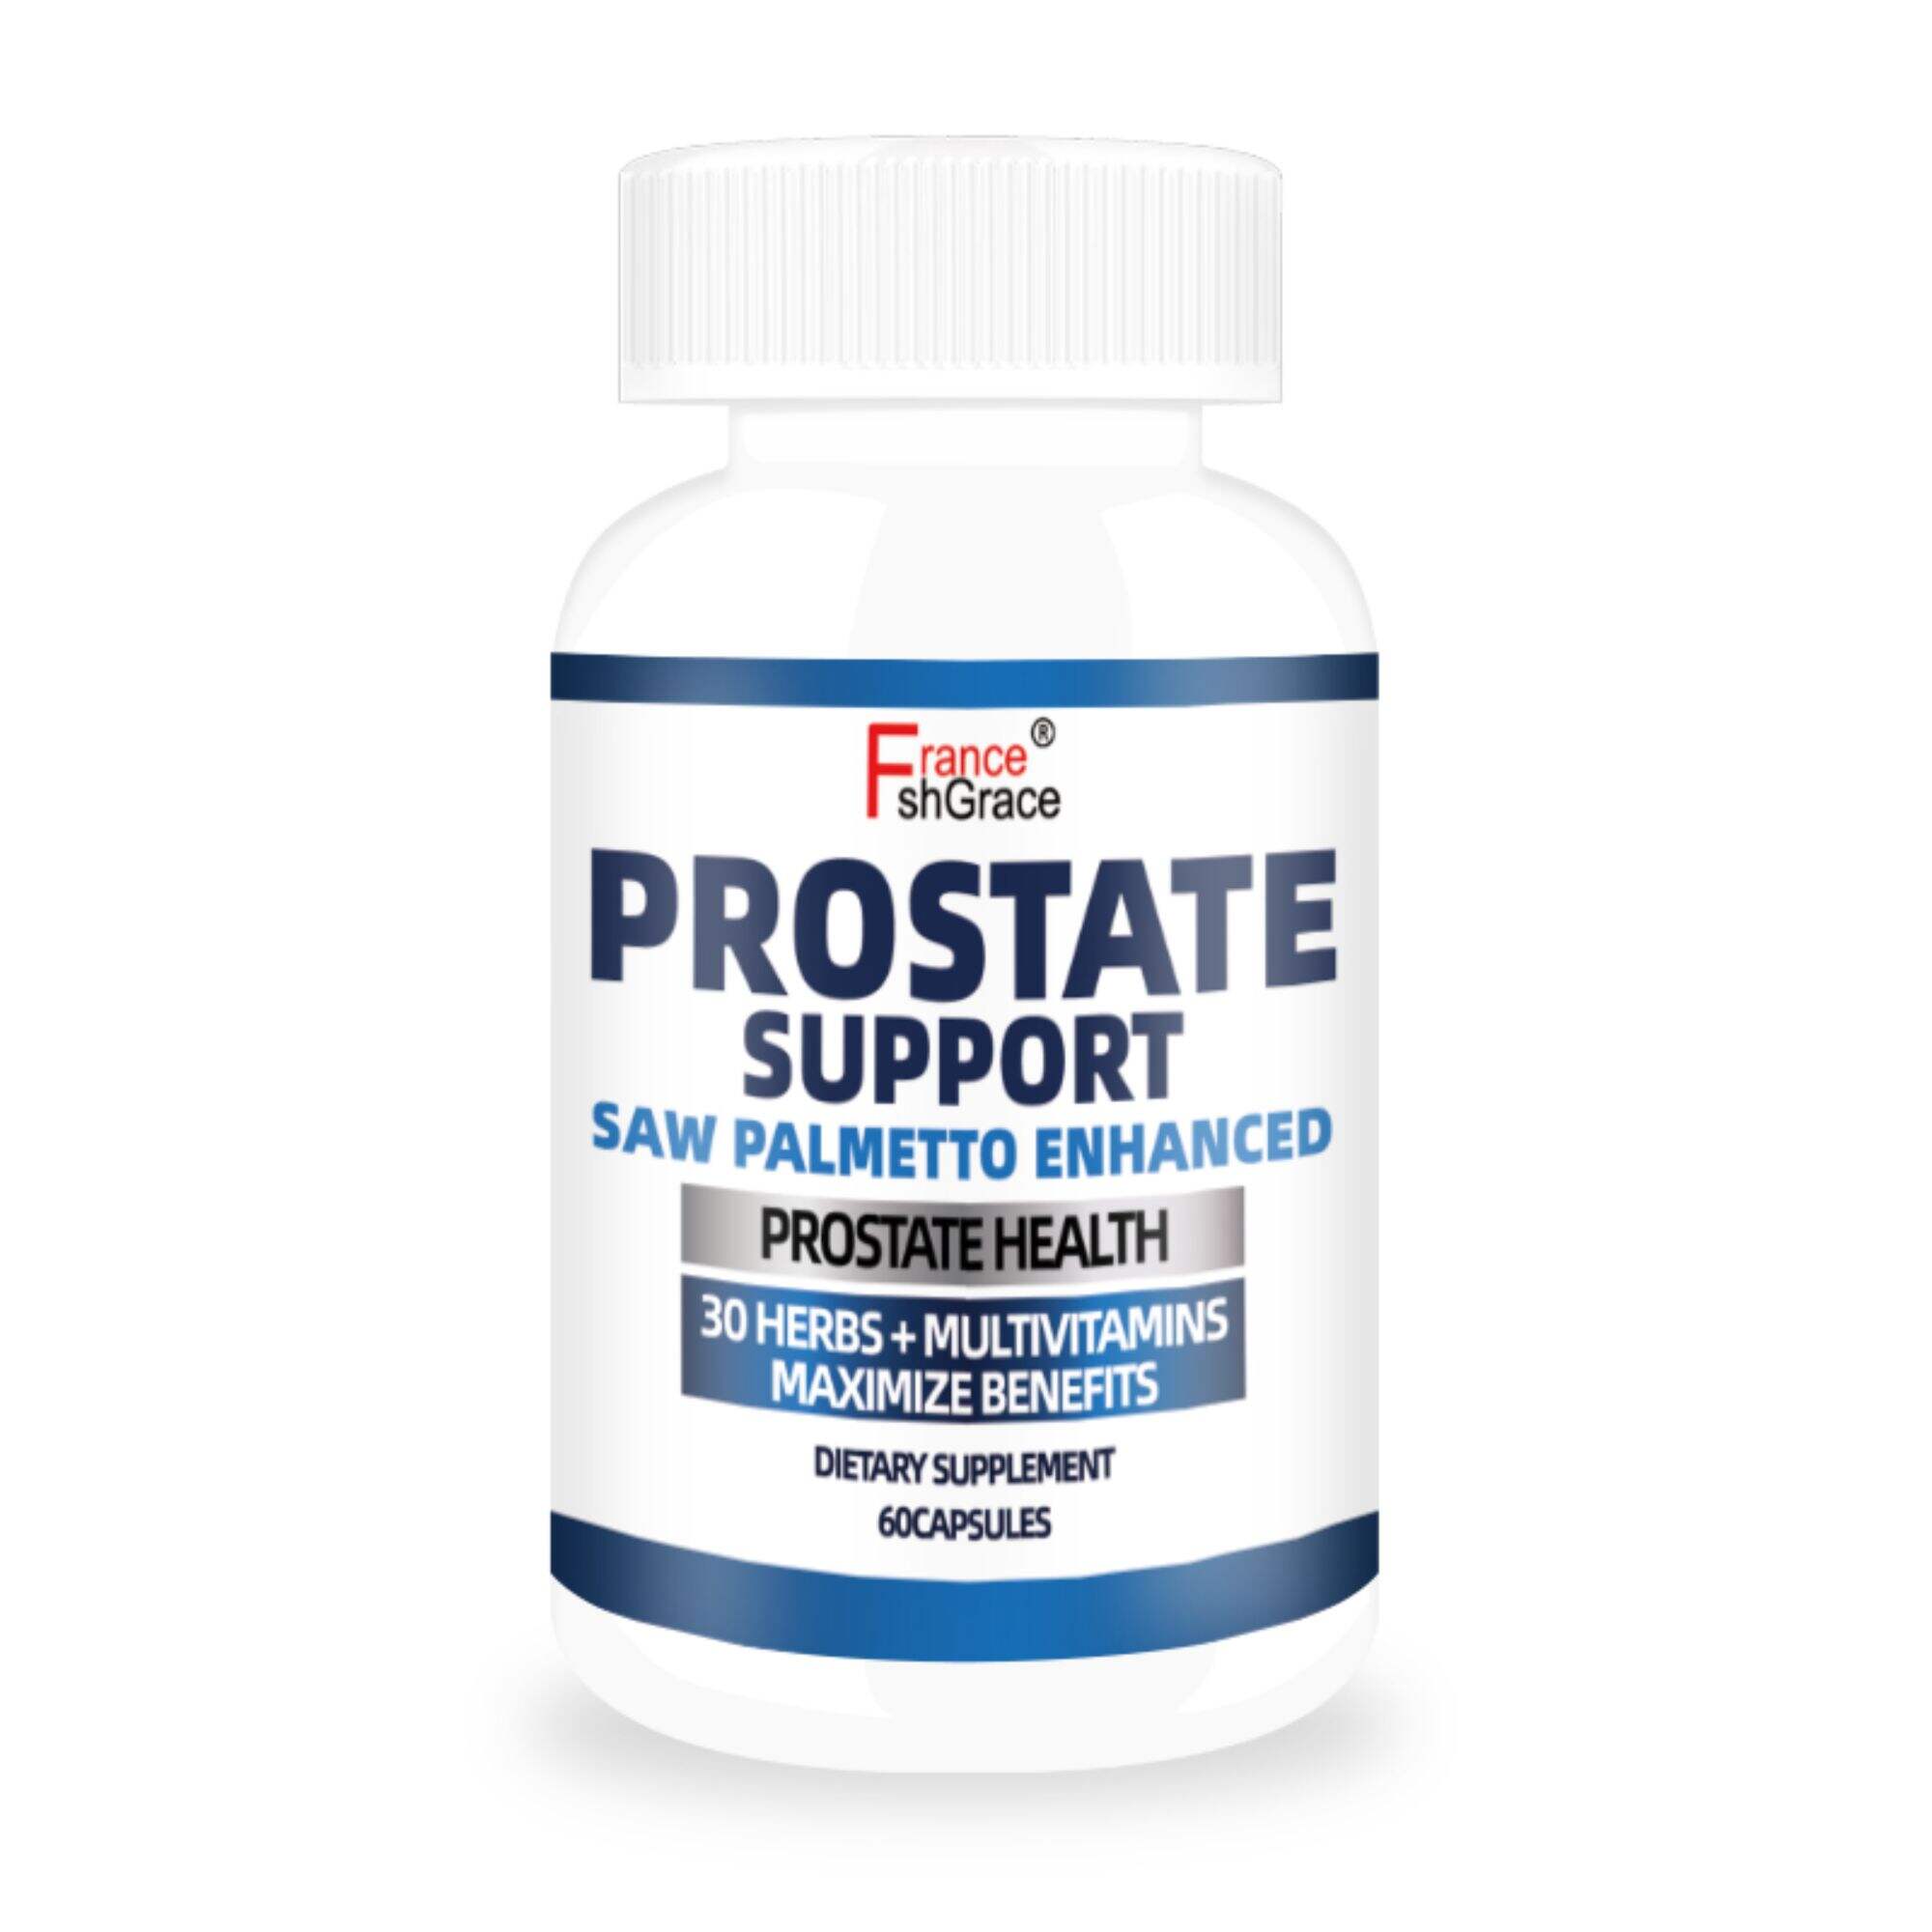 prostate support saw palmetto enhanced 30 herbs and multivitamins maximize benefits